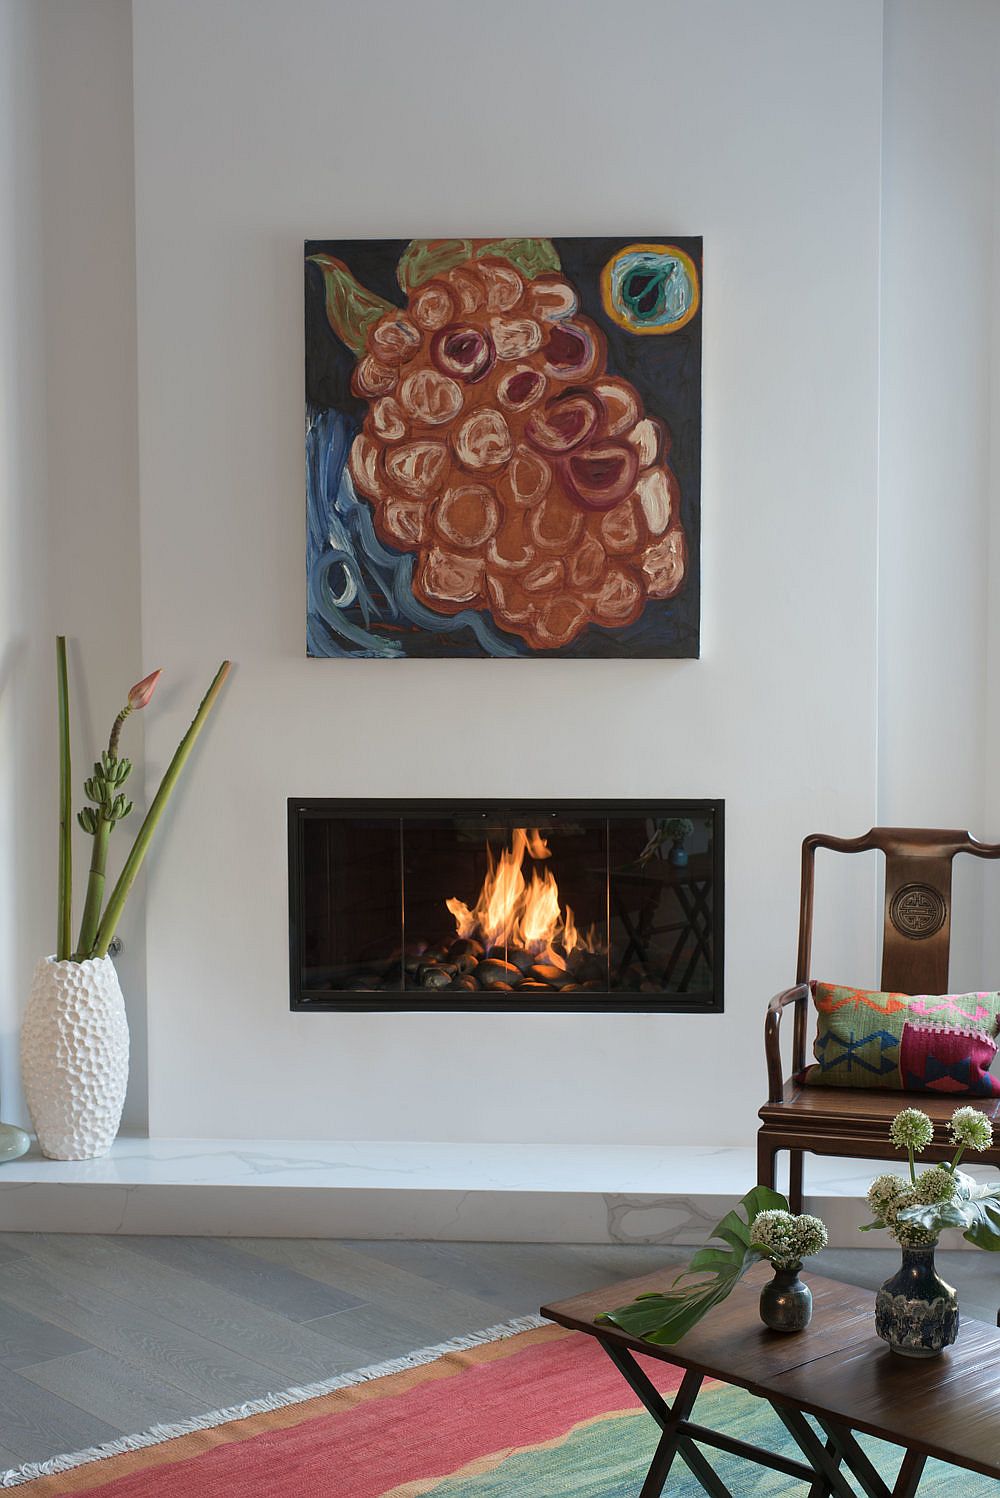 White-Plaster-fireplace-and-marble-hearth-create-a-cozy-focal-point